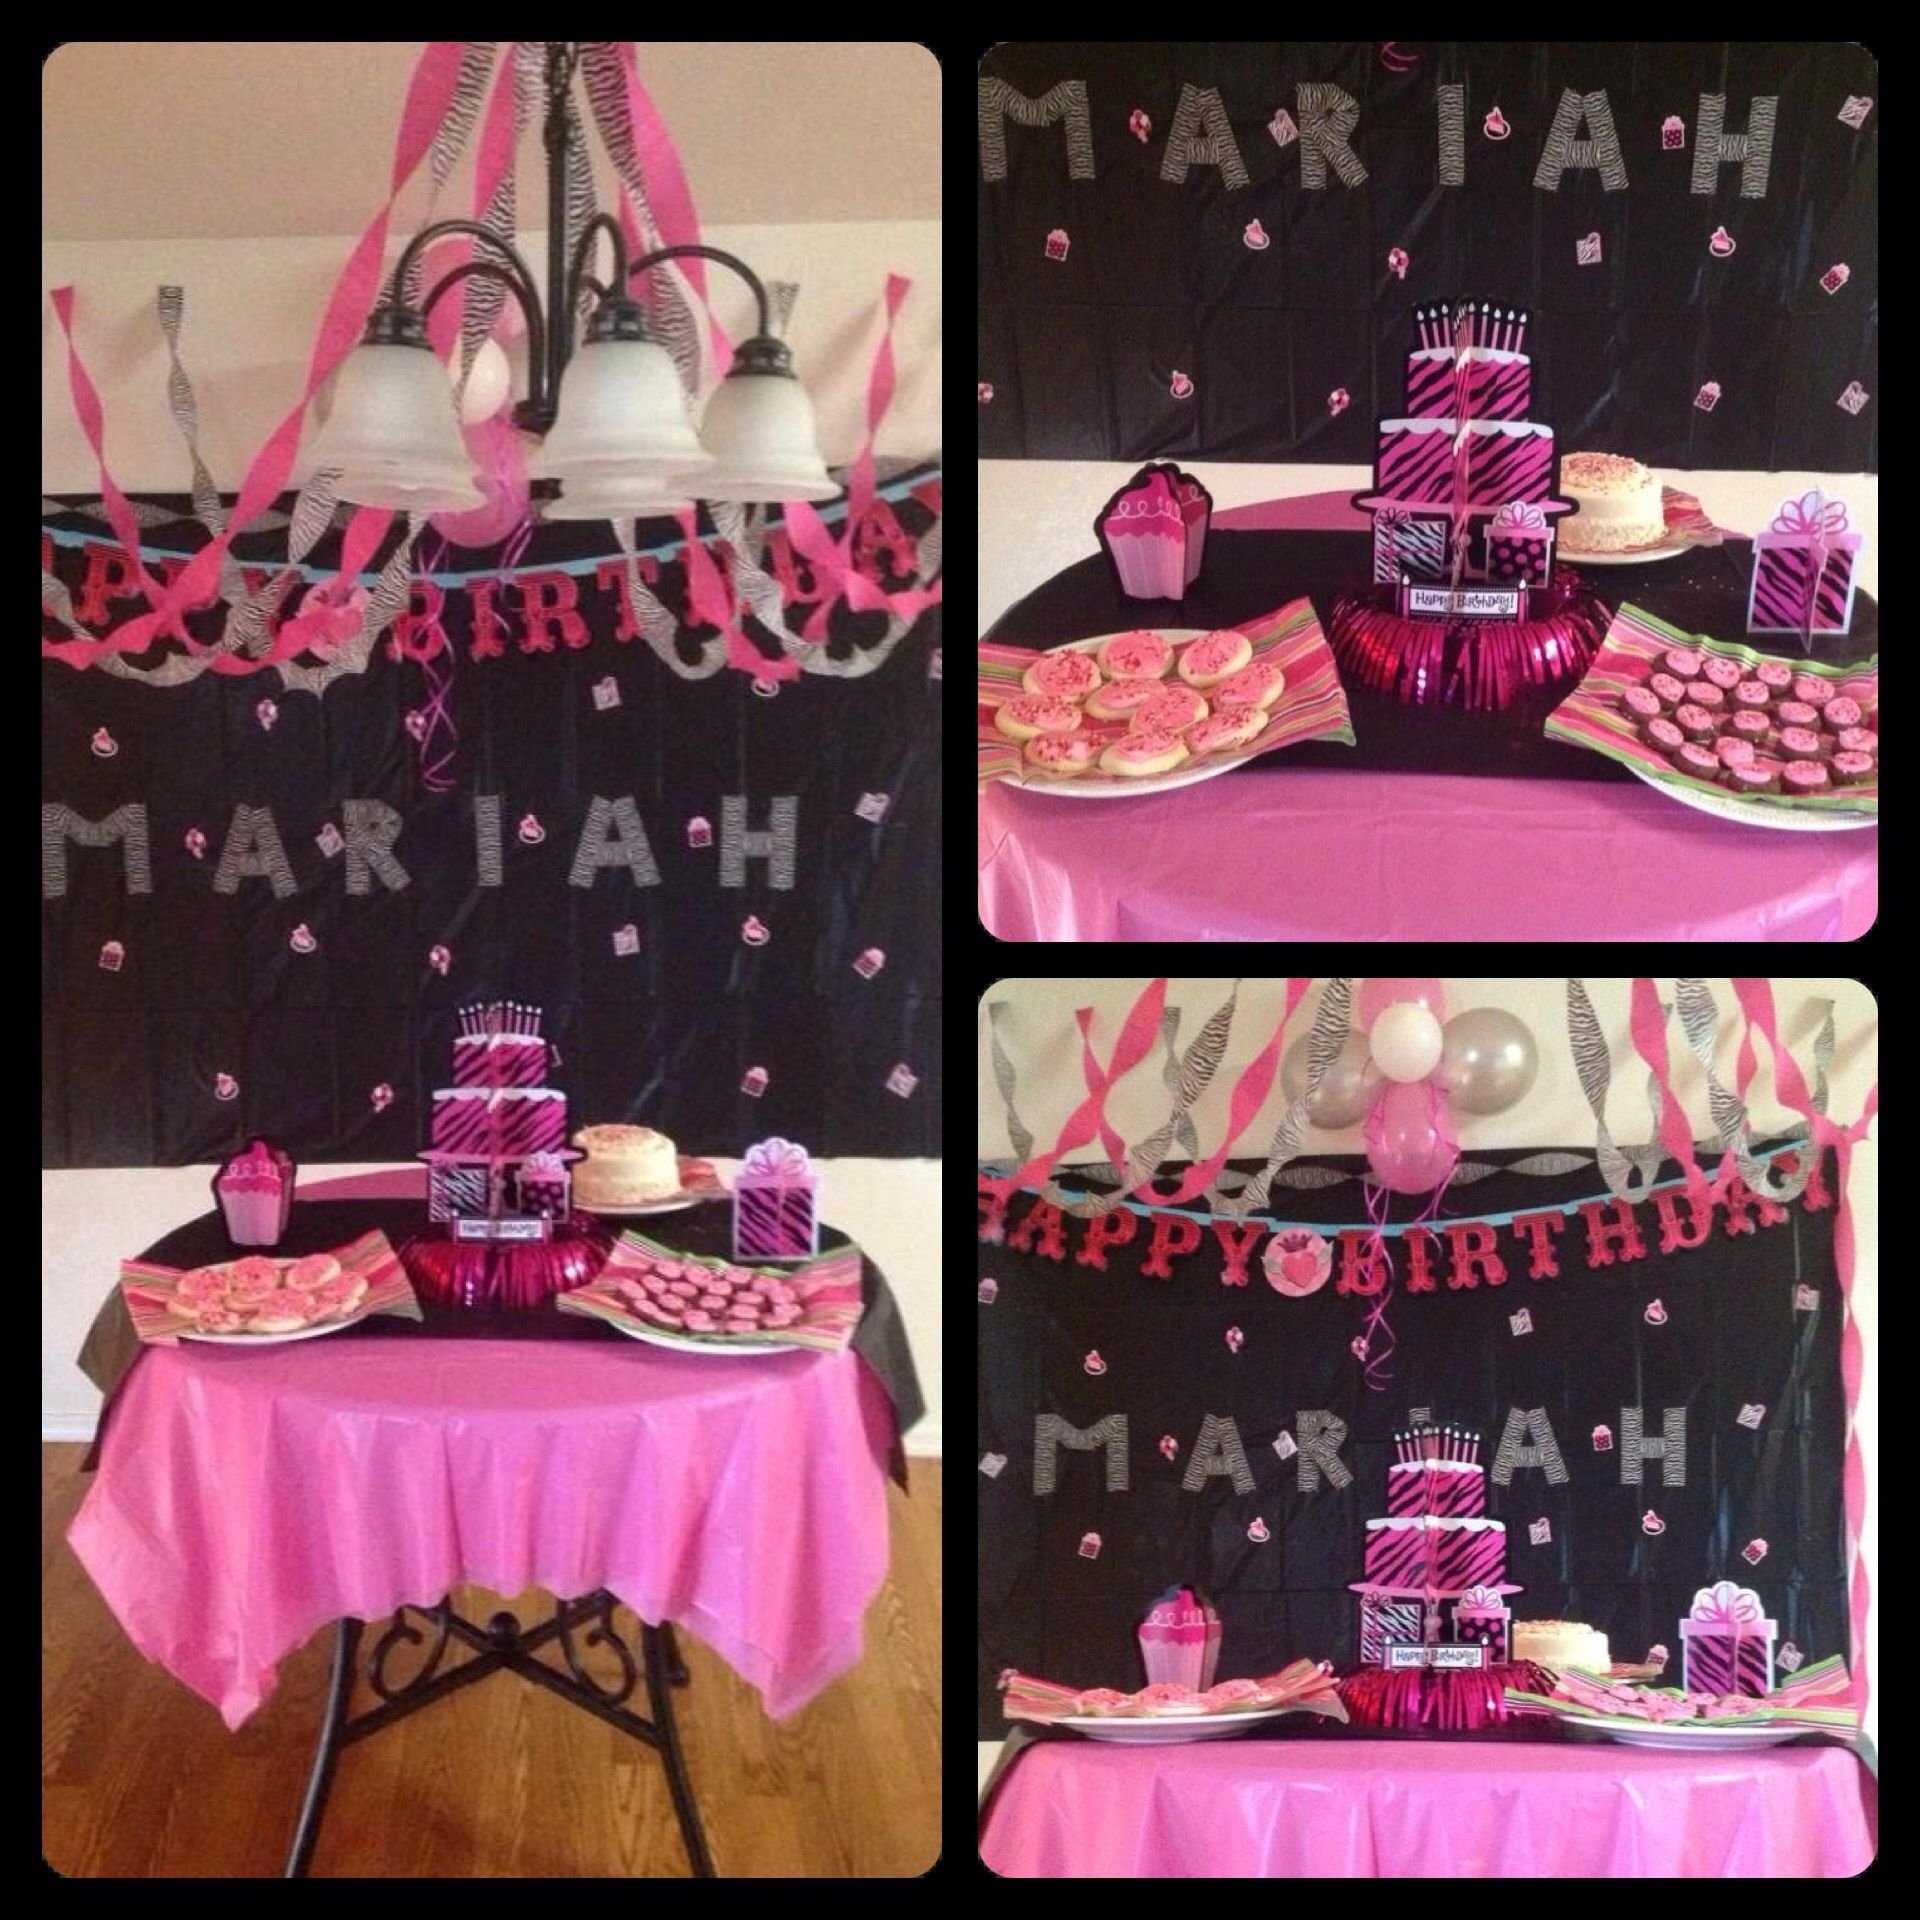 10 Most Recommended Slumber Party Ideas For 10 Year Olds party ideas had my 10 year old celebrate her birthday with some 15 2022